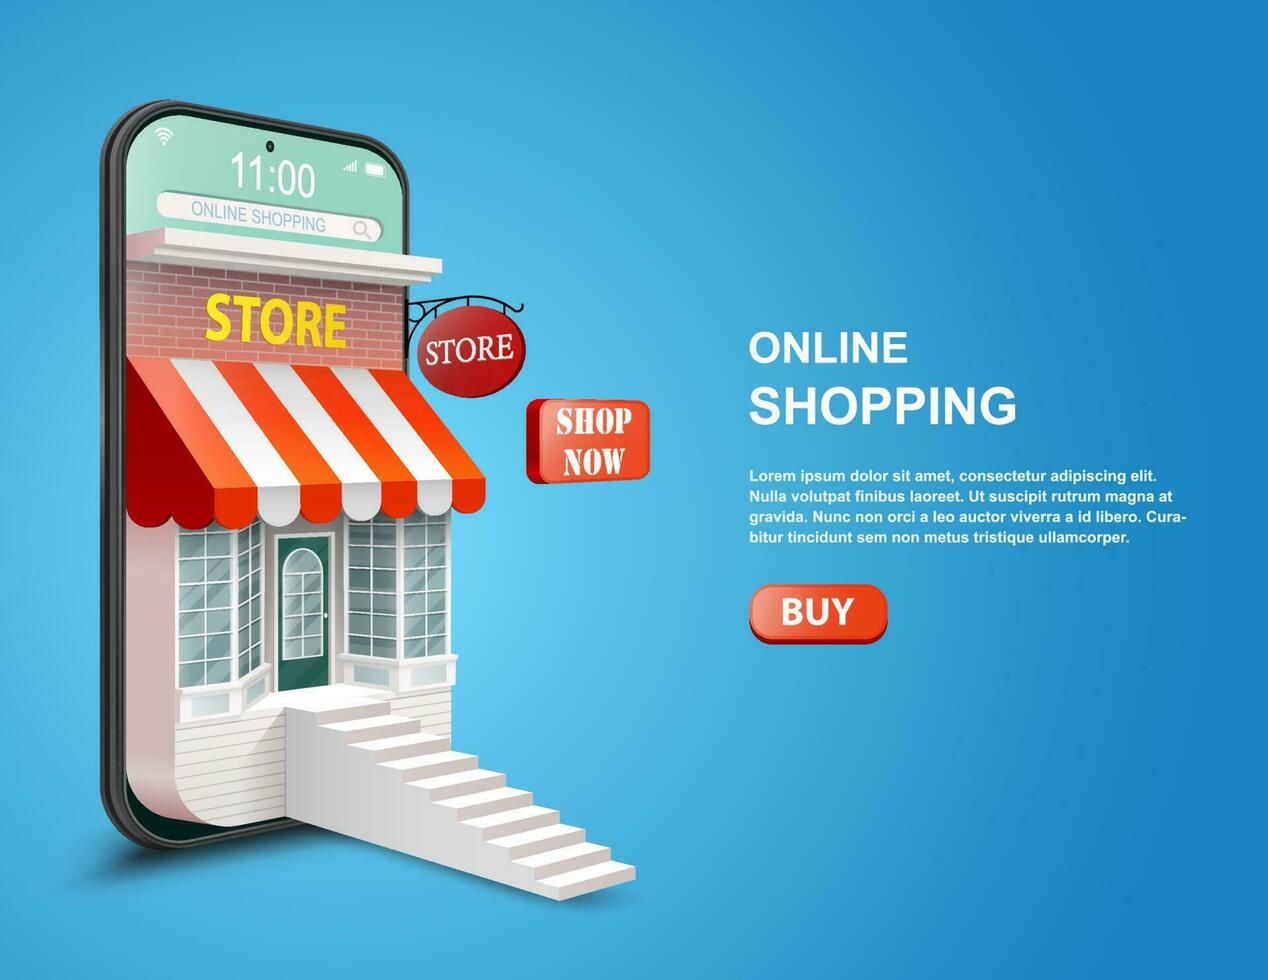 Shopping Online on Mobile Phone Application or Website Concept. Digital Marketing Promotion. Smartphone as a Store 3D Vector Illustration